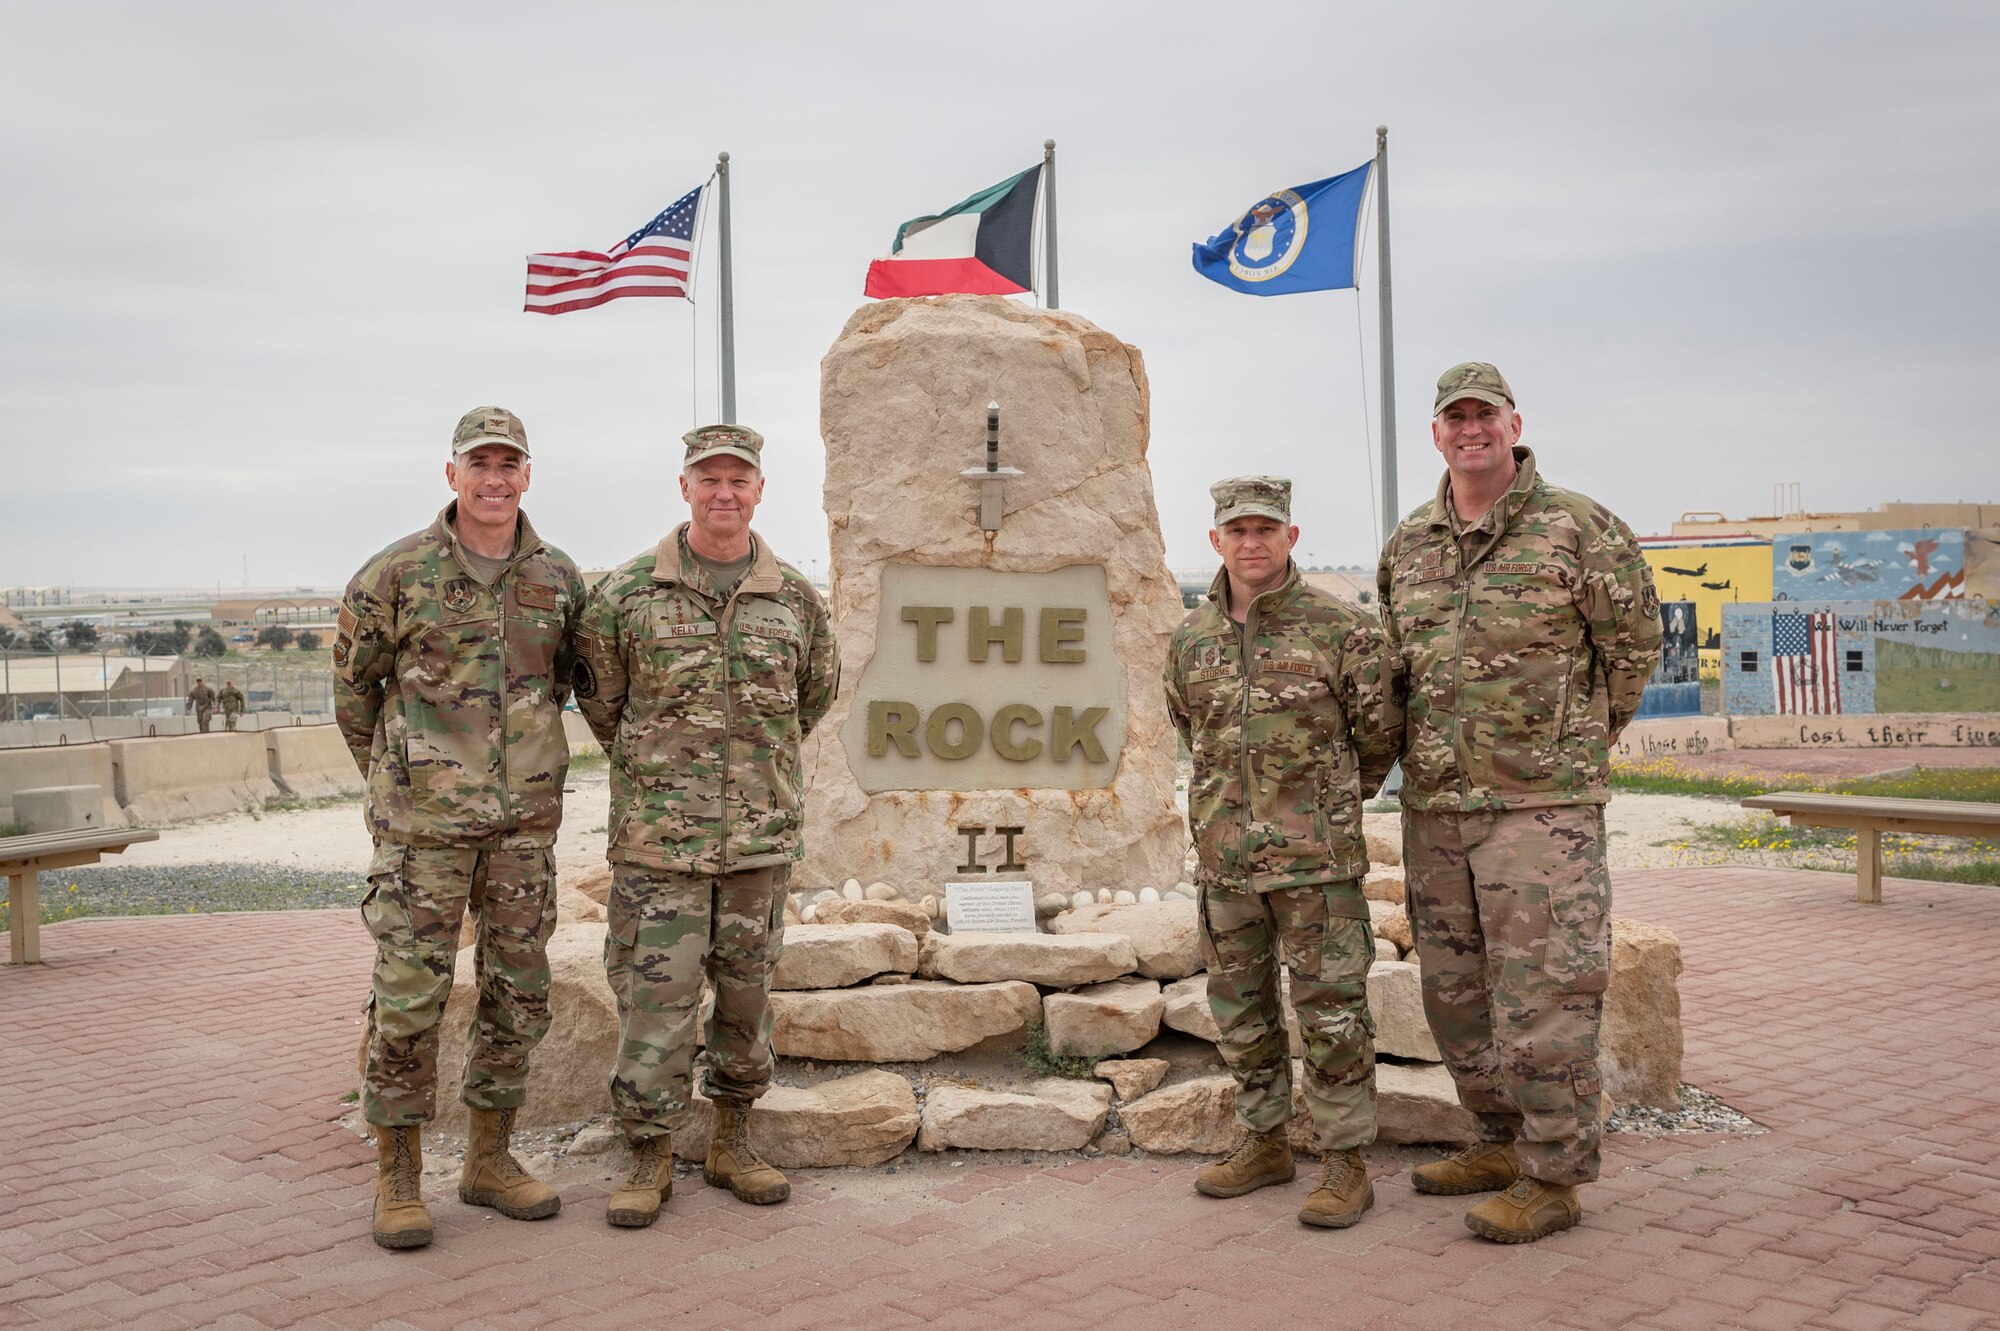 From left, U.S. Air Force Col. George Buch, 386th Air Expeditionary Wing commander, Gen. Mark Kelly, commander of Air Combat Command, Command Chief Master Sgt. John Storms, Air Combat Command, and Chief Master Sgt. Louis Ludwig, 386th AEW command chief, pose for a photo in front of “The Rock” during a tour at Ali Al Salem Air Base, Kuwait, Feb. 15, 2023.